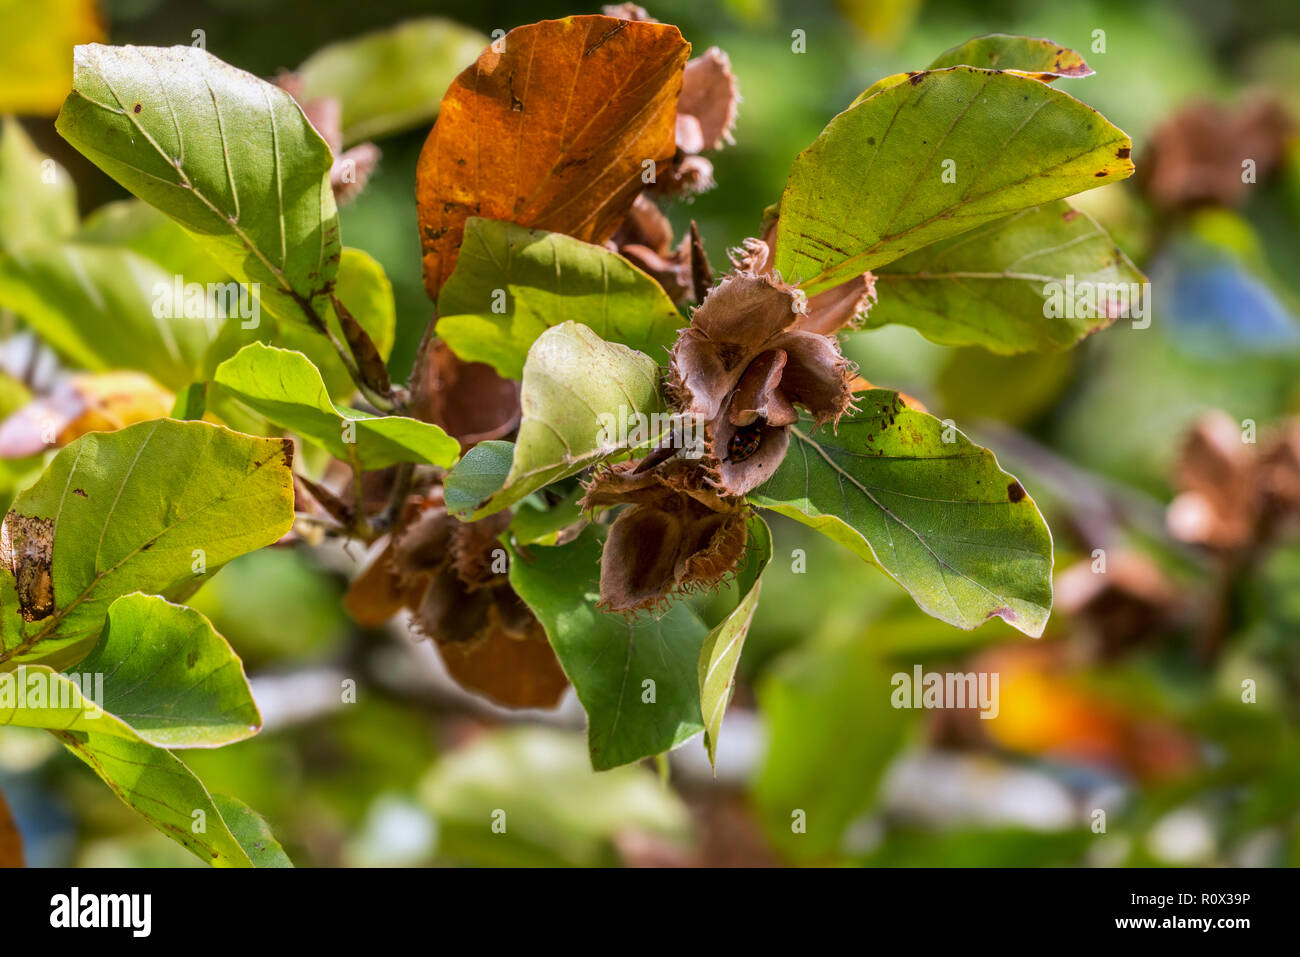 European beech / common beech (Fagus sylvatica) close up of leaves and nuts in open cupules in early autumn Stock Photo